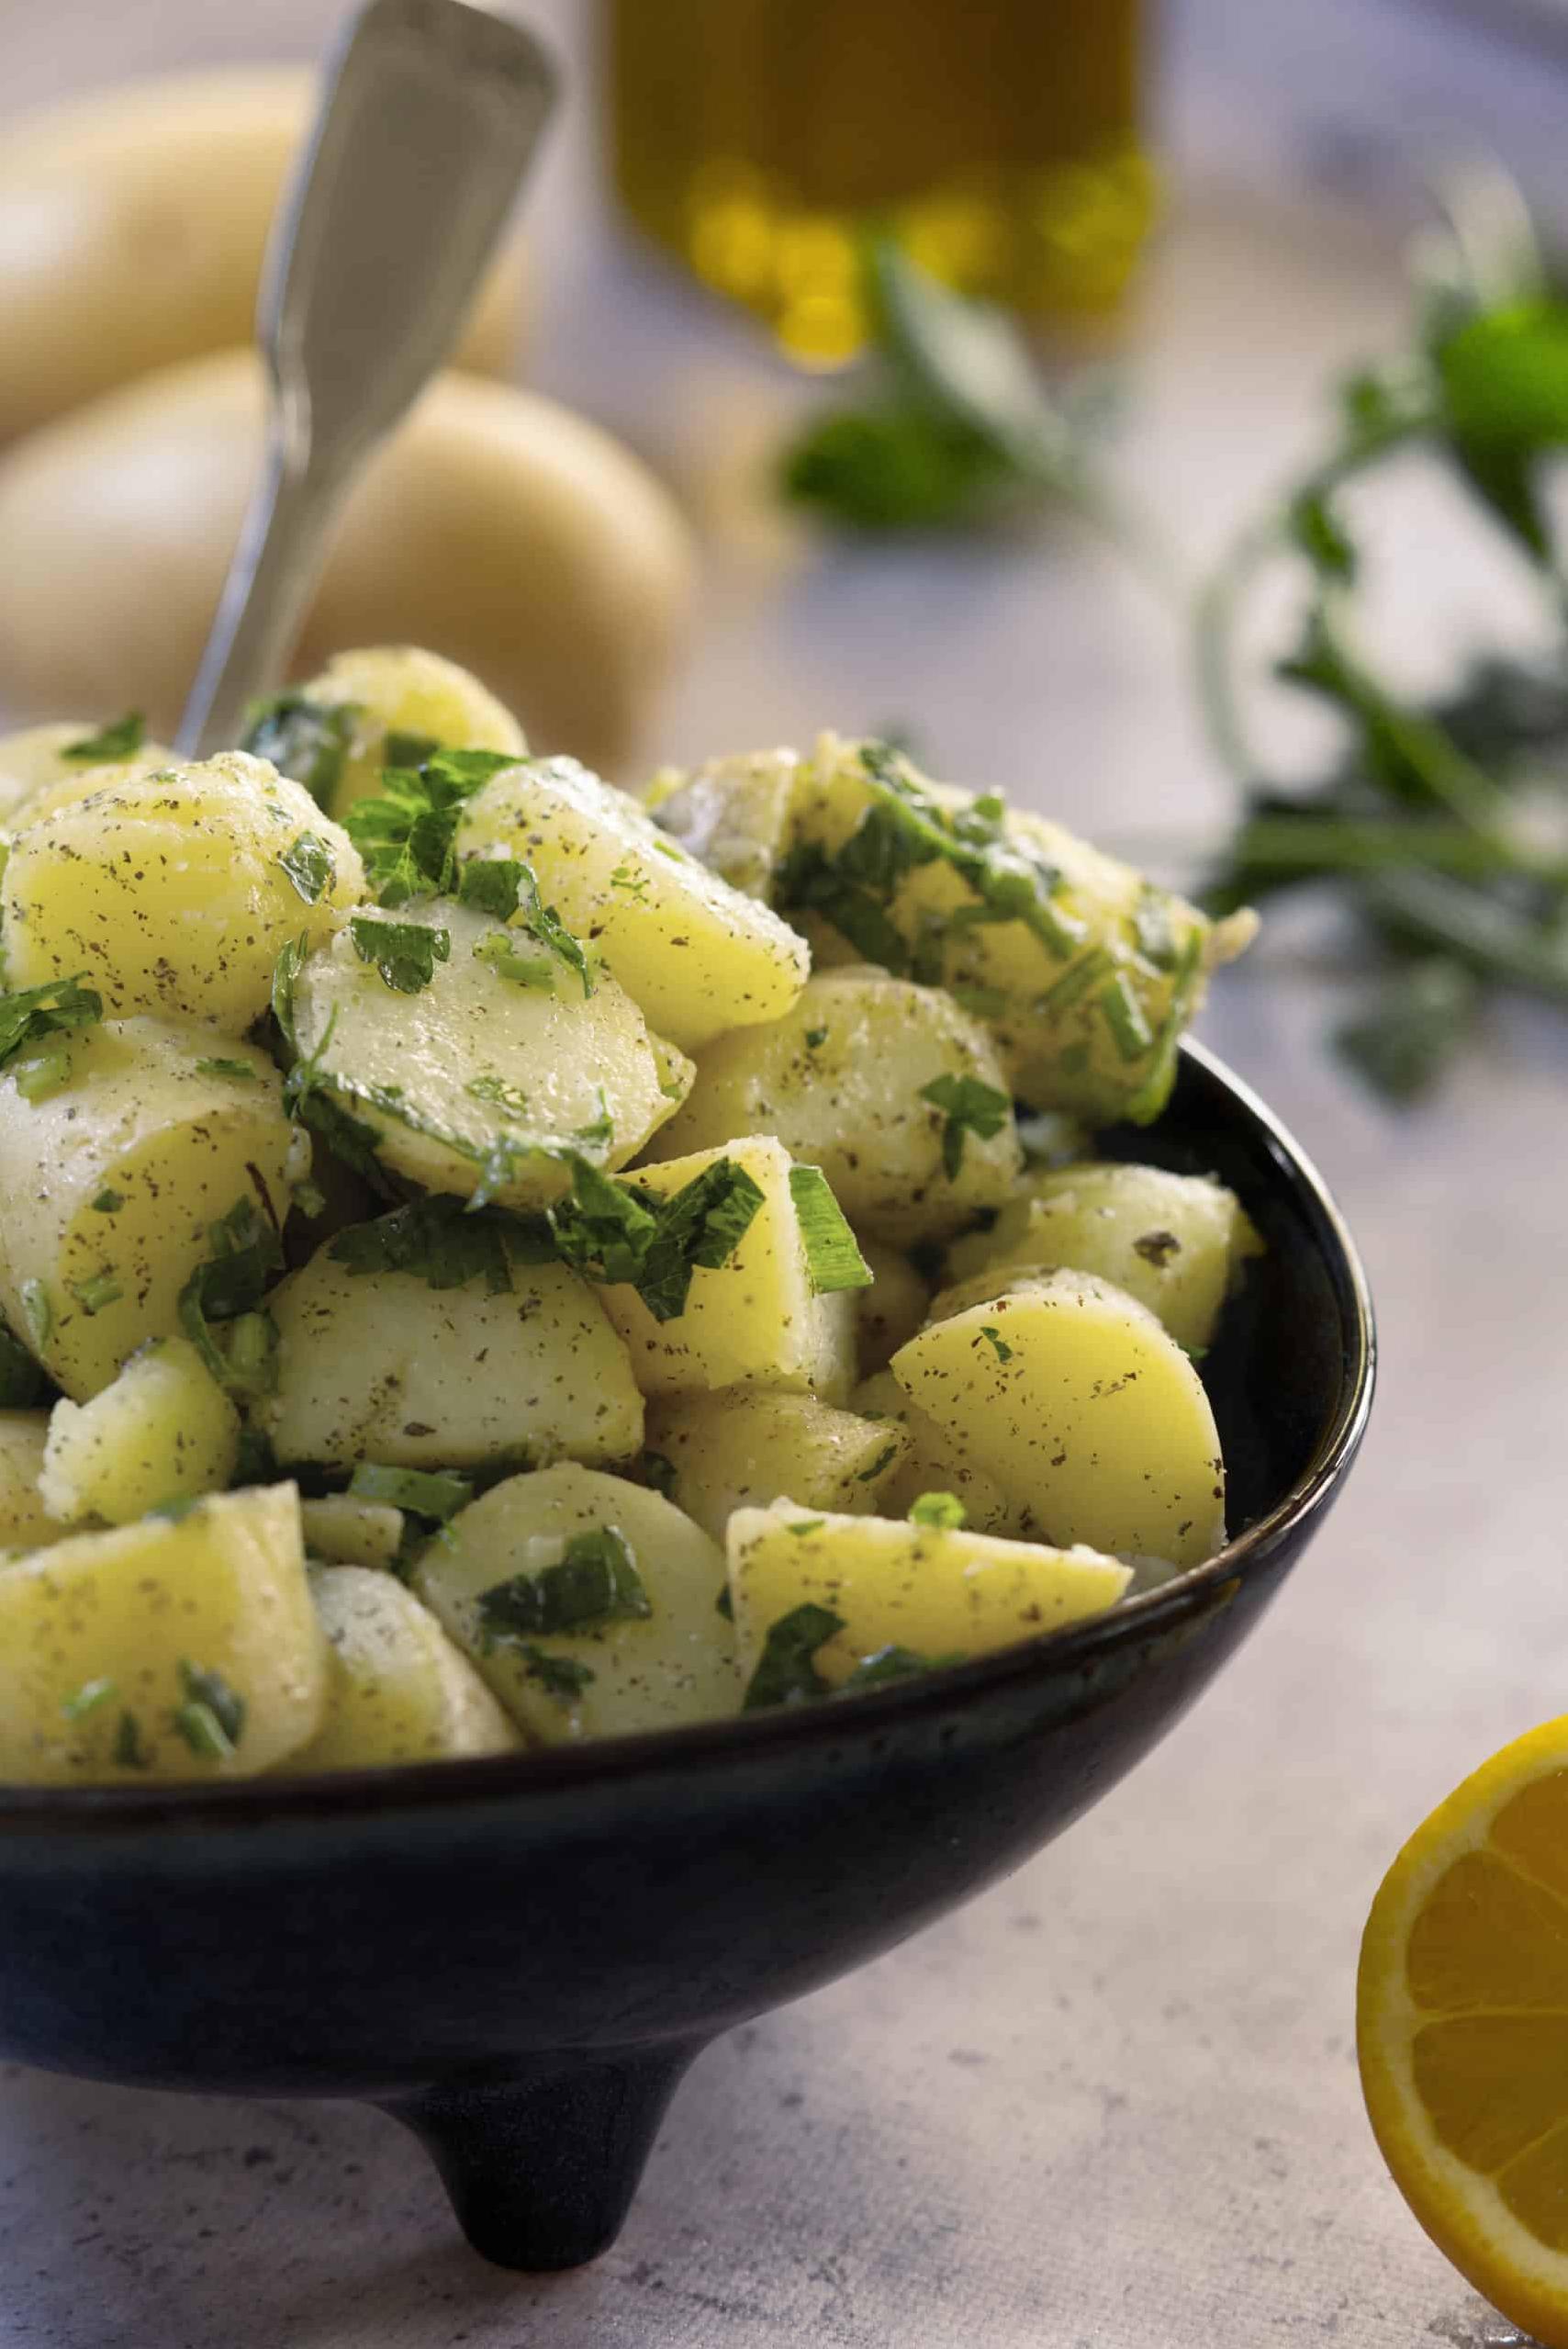  A simple yet flavorful twist on classic potato salad.